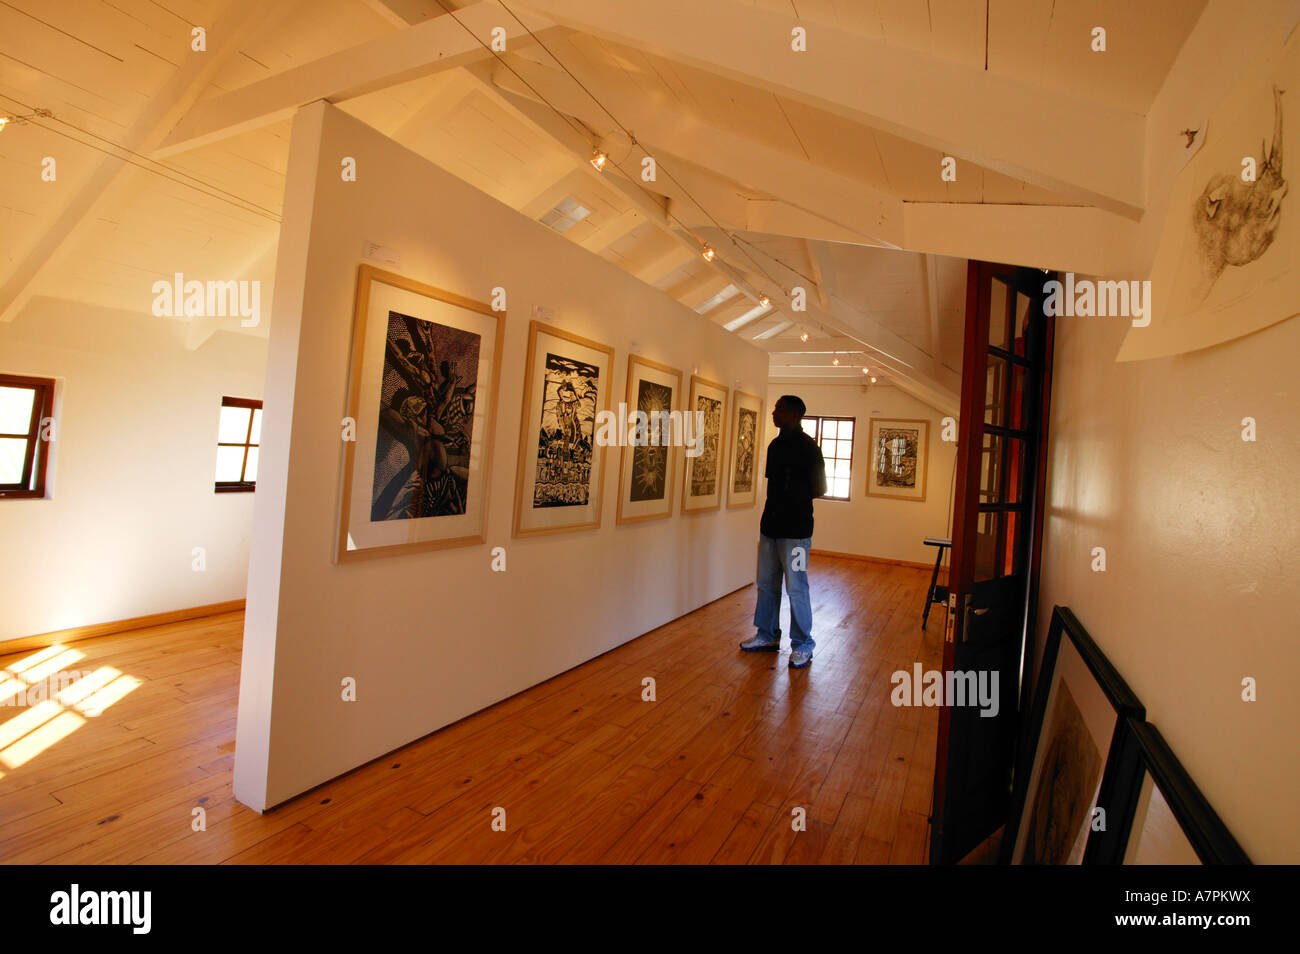 A tourist in an art gallery displaying African art in Graskop Mpumalanga South Africa Stock Photo